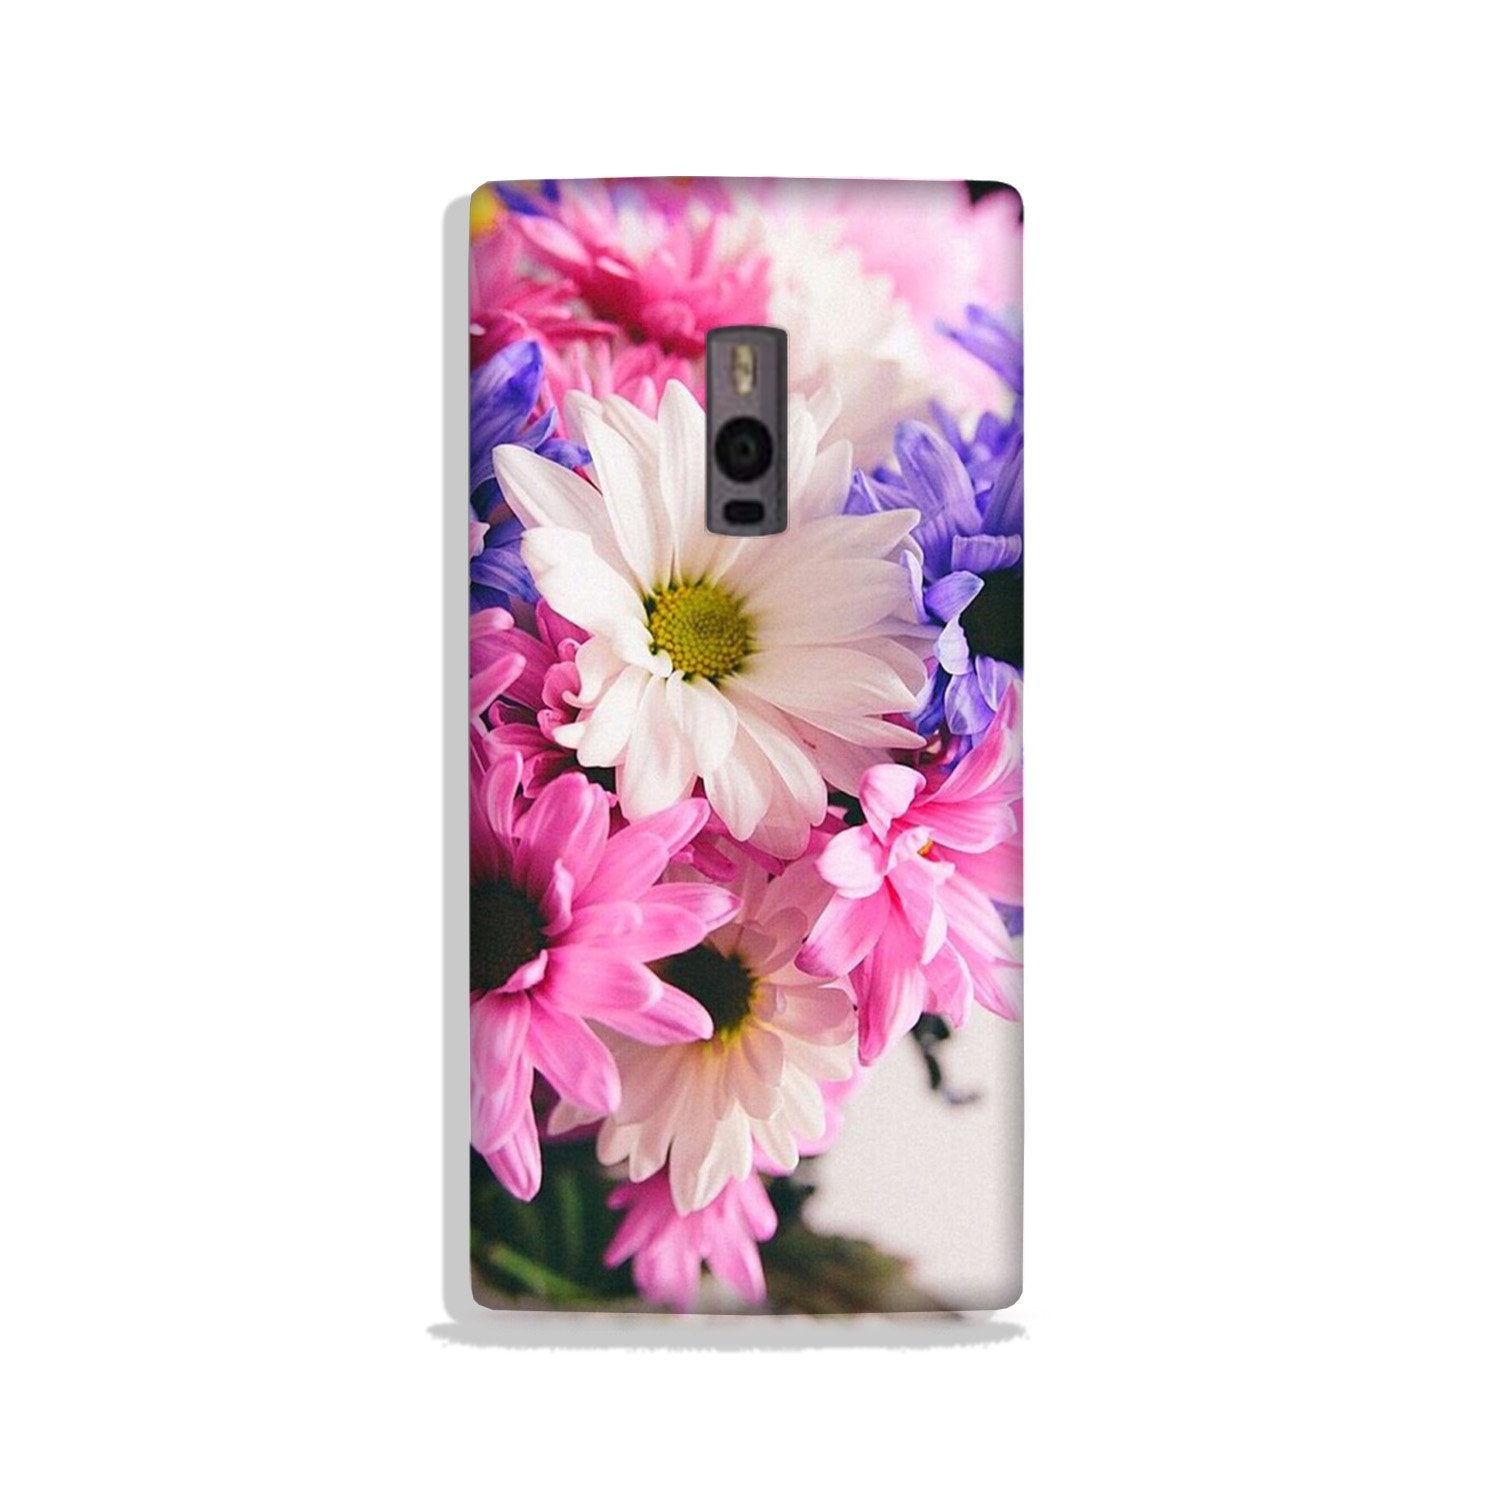 Coloful Daisy Case for OnePlus 2